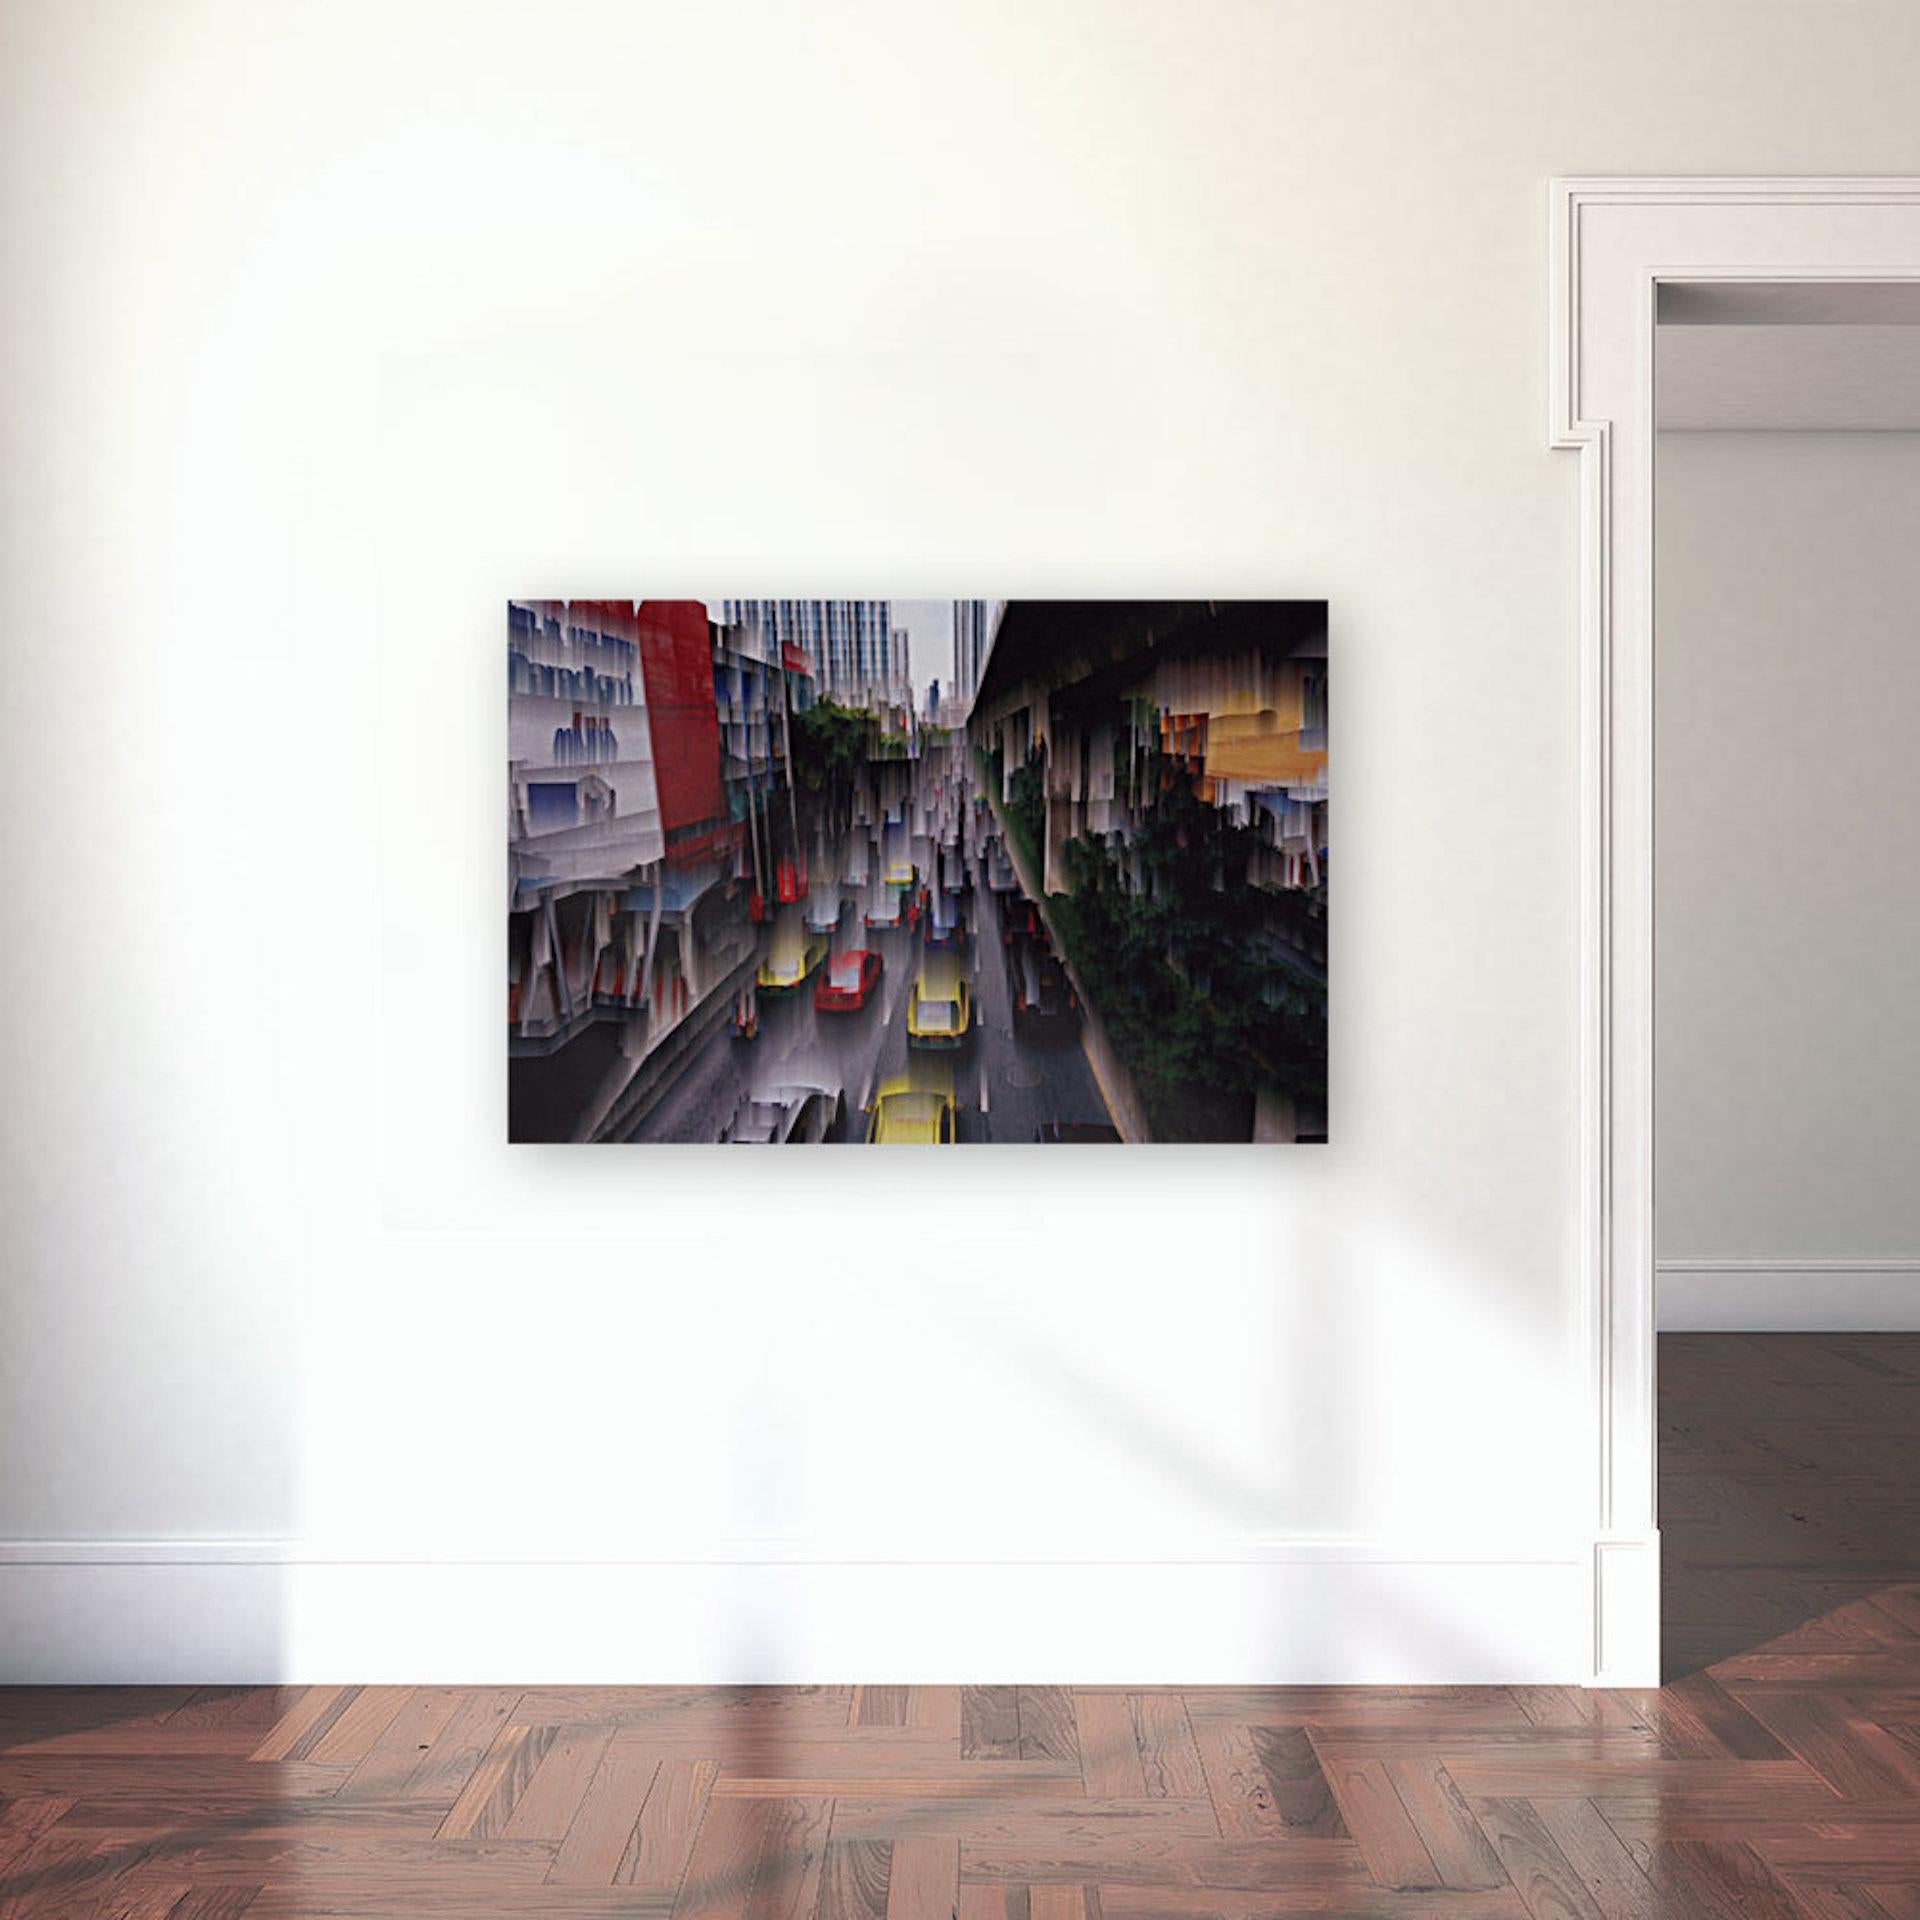 Downtown Bridge BY AGENT X, Limited Edition Art, Contemporary Abstract Cityscape im Angebot 5